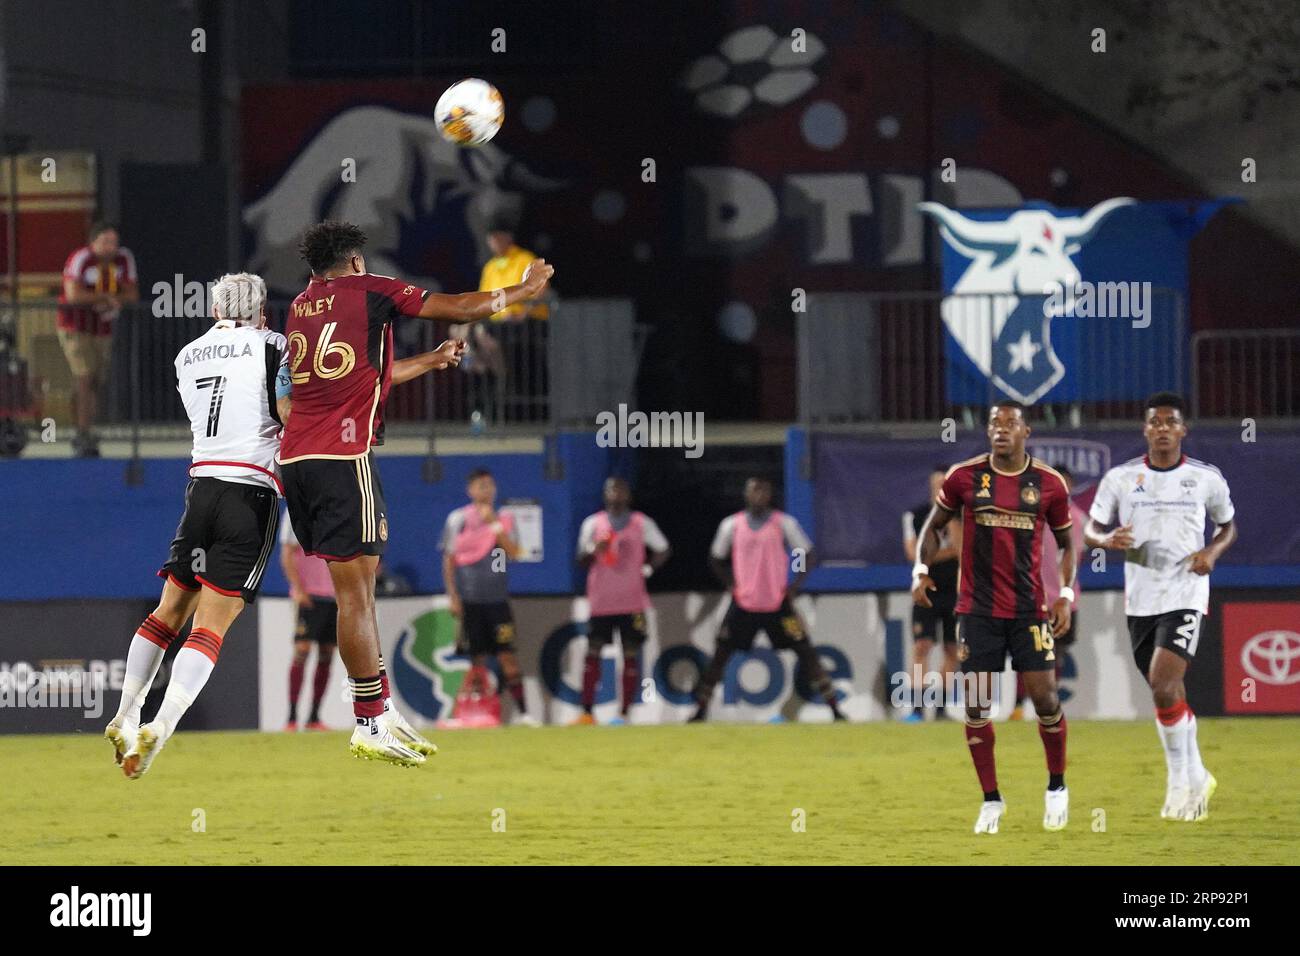 Frisco, USA. 02nd Sep, 2023. Frisco, Texas, United States: Paul Arriola (Dallas) and Caleb Wiley (Atlanta) battle for the header during the MLS game between FC Dallas and Atlanta United played at Toyota Stadium on Saturday September 2, 2023. (Photo by Javier Vicencio/Eyepix Group/Sipa USA) Credit: Sipa USA/Alamy Live News Stock Photo